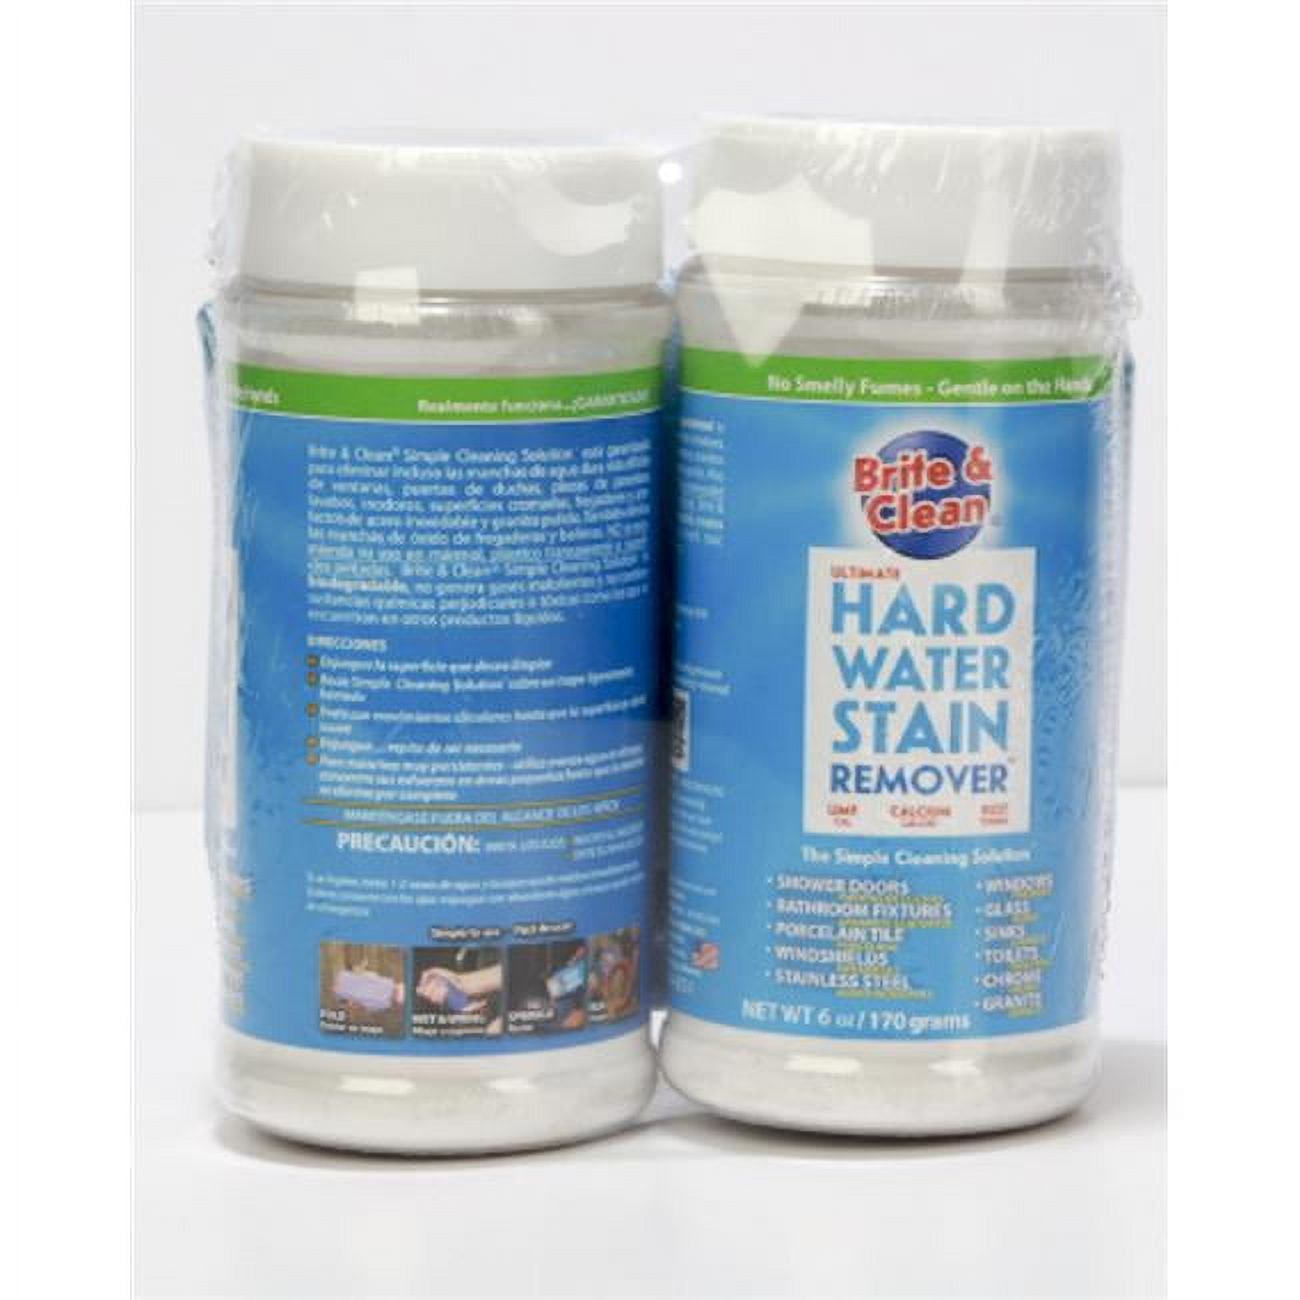 Brite & Clean BW2SCS2 BriteWipes Ultimate Hard Water Stain Remover - Pack of 2